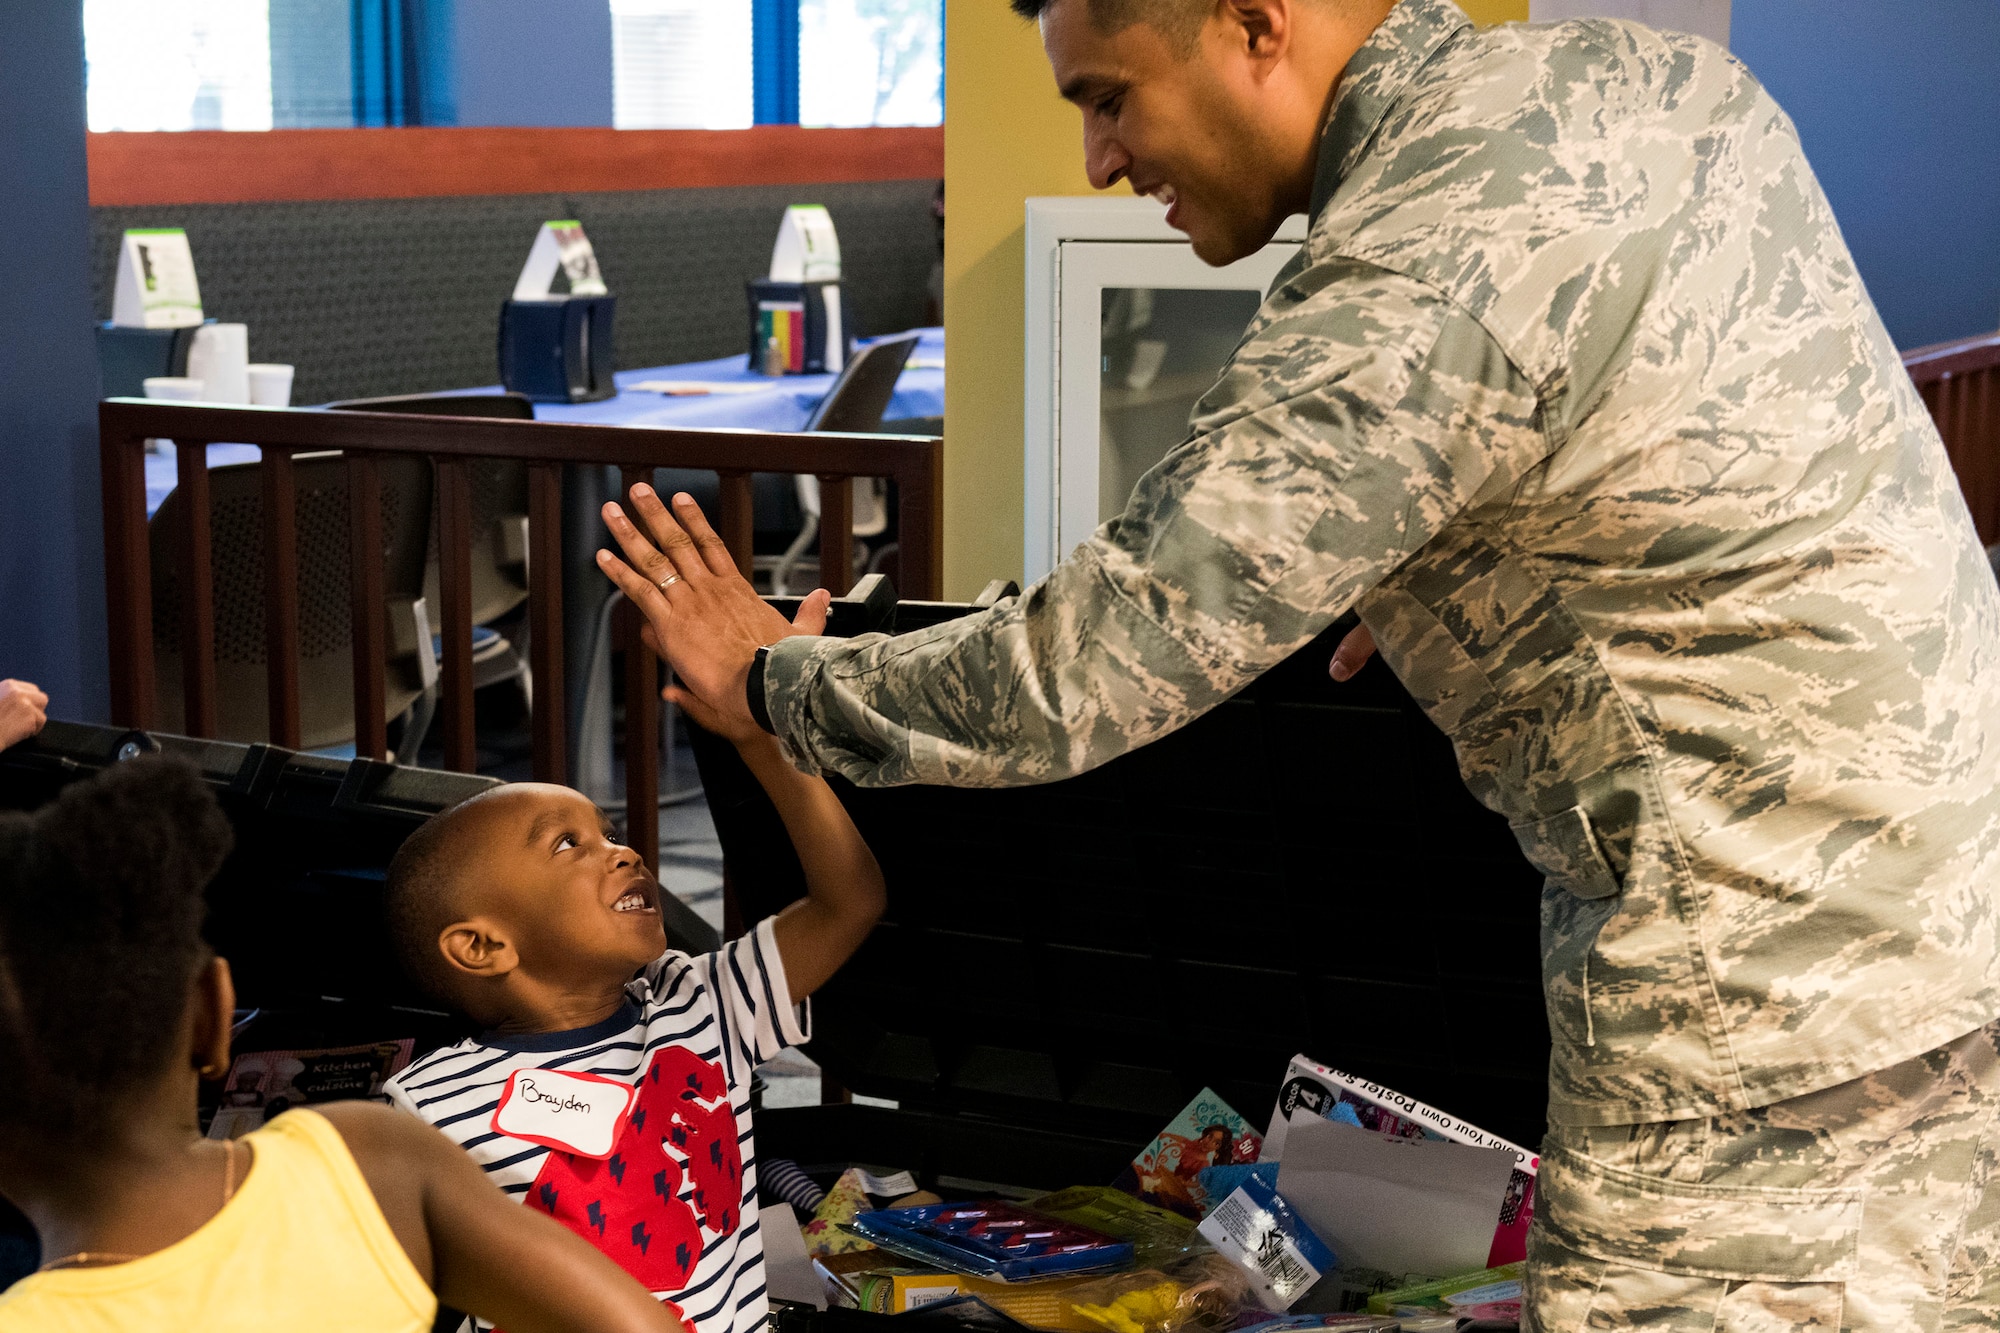 Lt. Col. Gregory Savella, 23d Force Support Squadron commander, high-fives a participant during a deployed spouse dinner, April 23, 2019, at Moody Air Force Base, Ga. The dinner served as an opportunity for the families of deployed members to bond and provide relief. The mission’s success depends on resilient Airmen and families, who are prepared to make sacrifices with the support of their fellow Airmen, local communities and leadership. (U.S. Air Force photo by Senior Airman Erick Requadt)